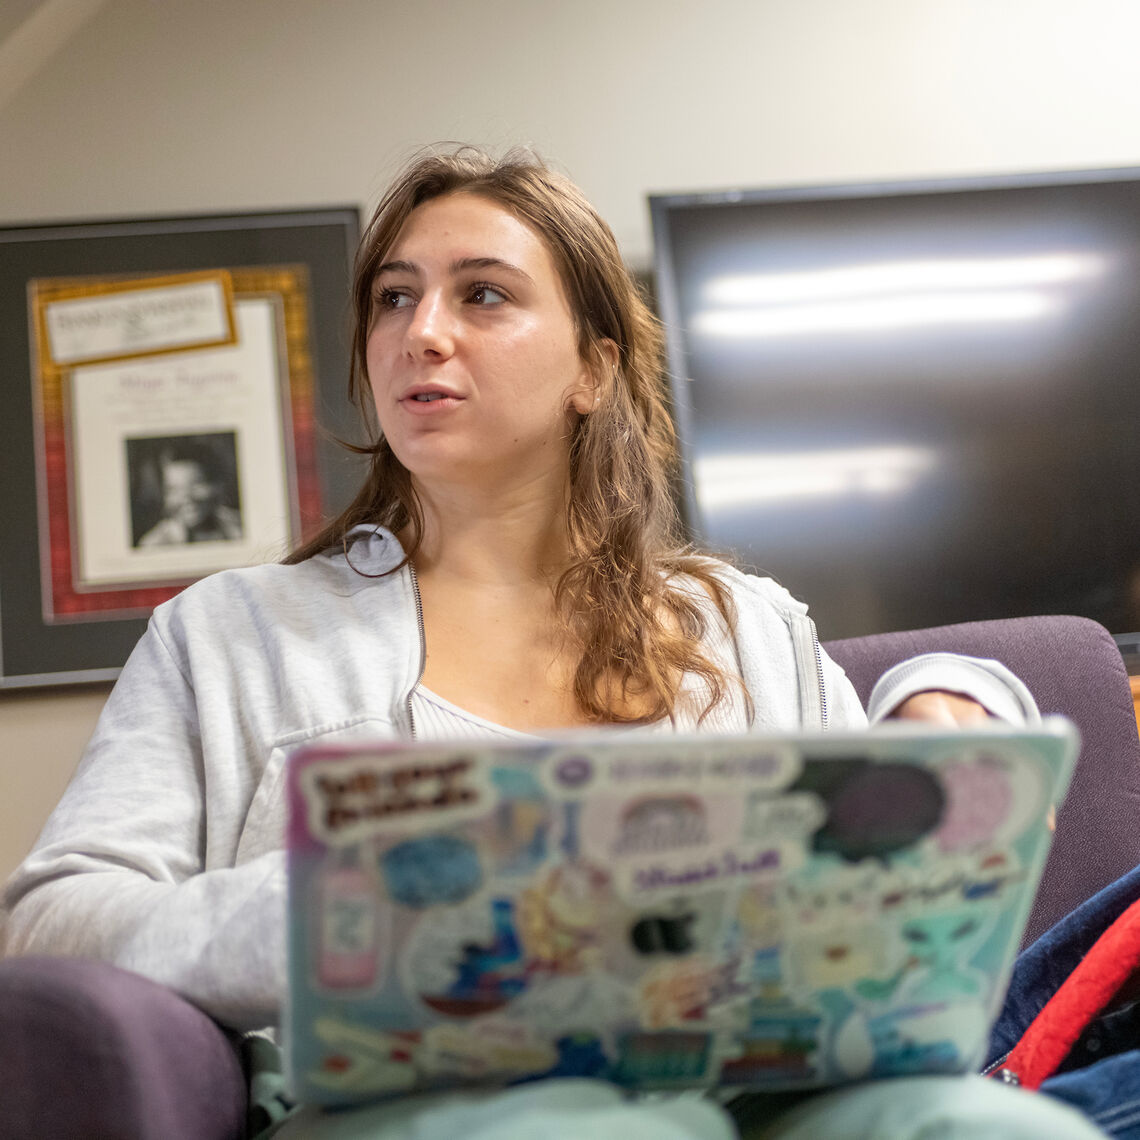 "Writing is a way to bridge gaps and connect worlds," says Olivia Lockey '23, member of the Emerging Writers Festival planning committee,